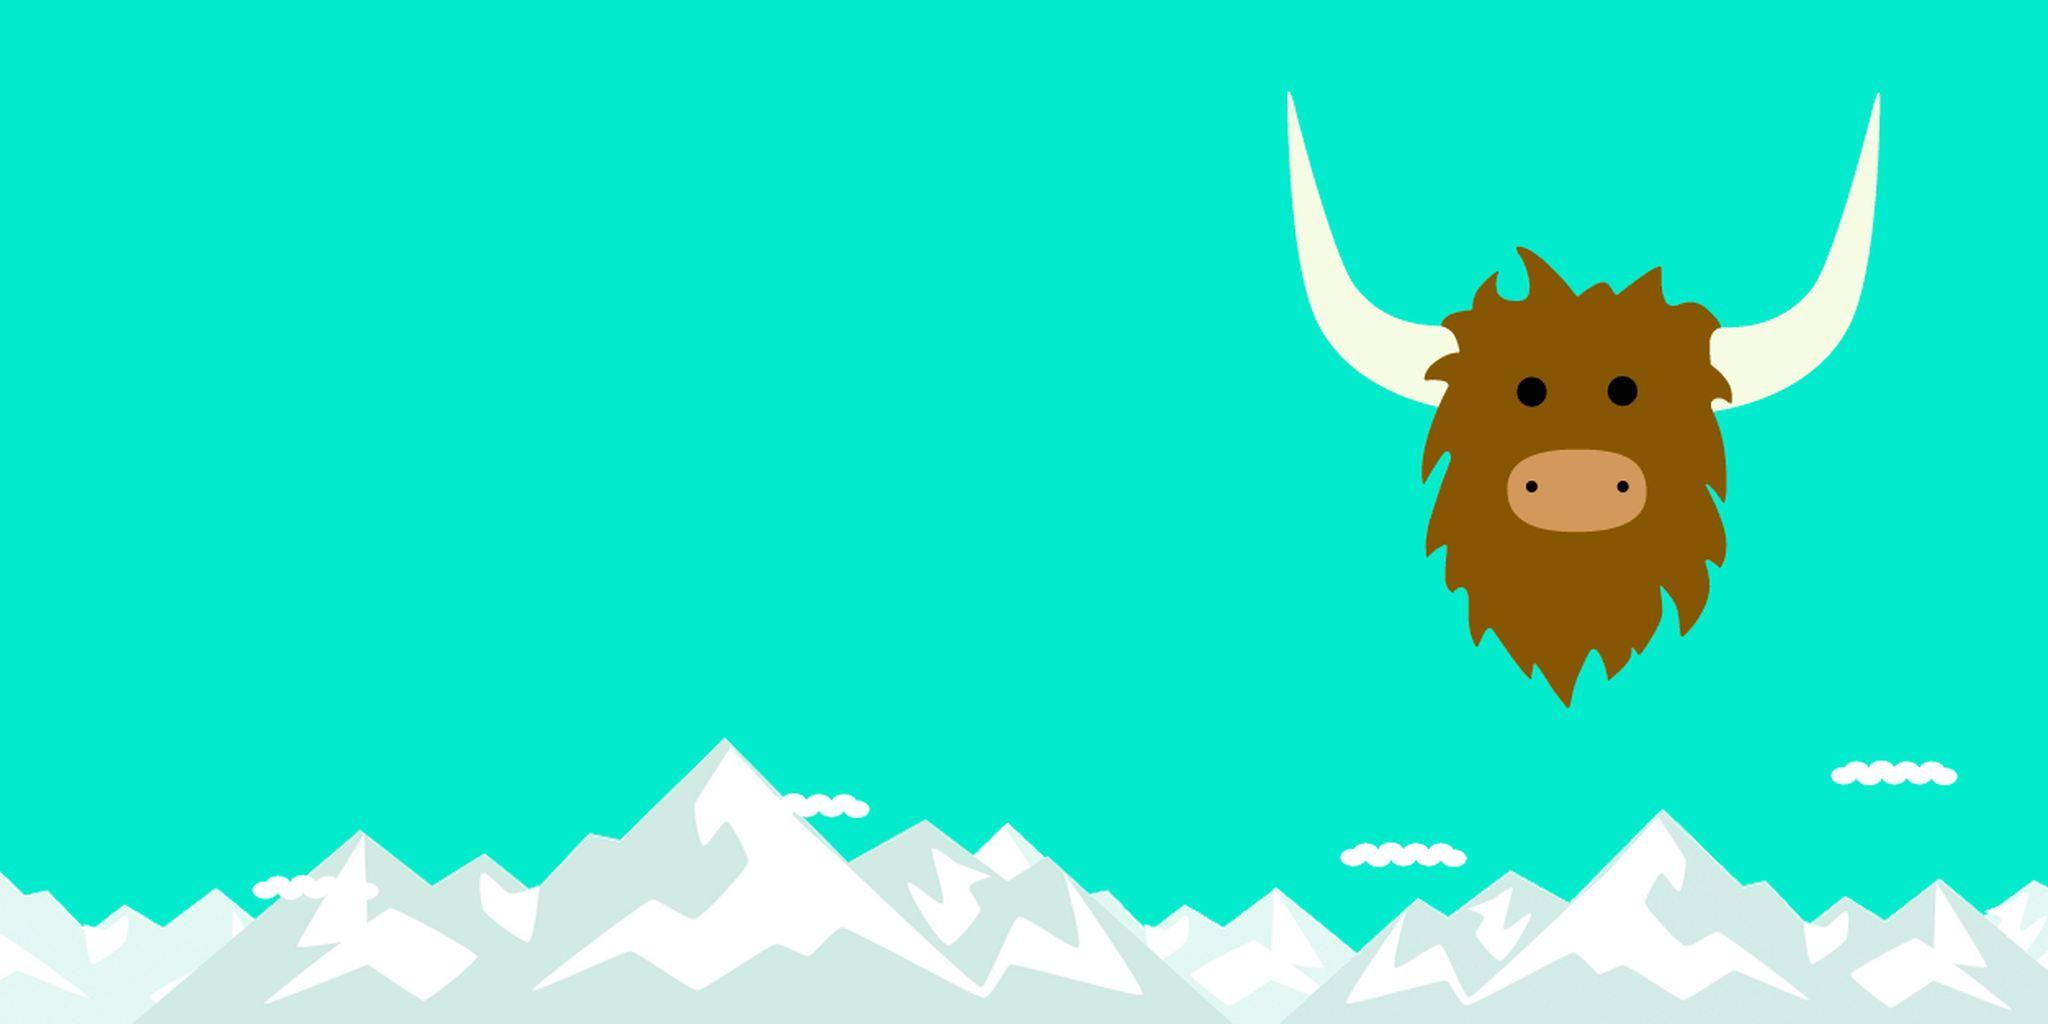 Yik Yak Logo - Here's how Yik Yak baited colleges into loving it | The Daily Dot